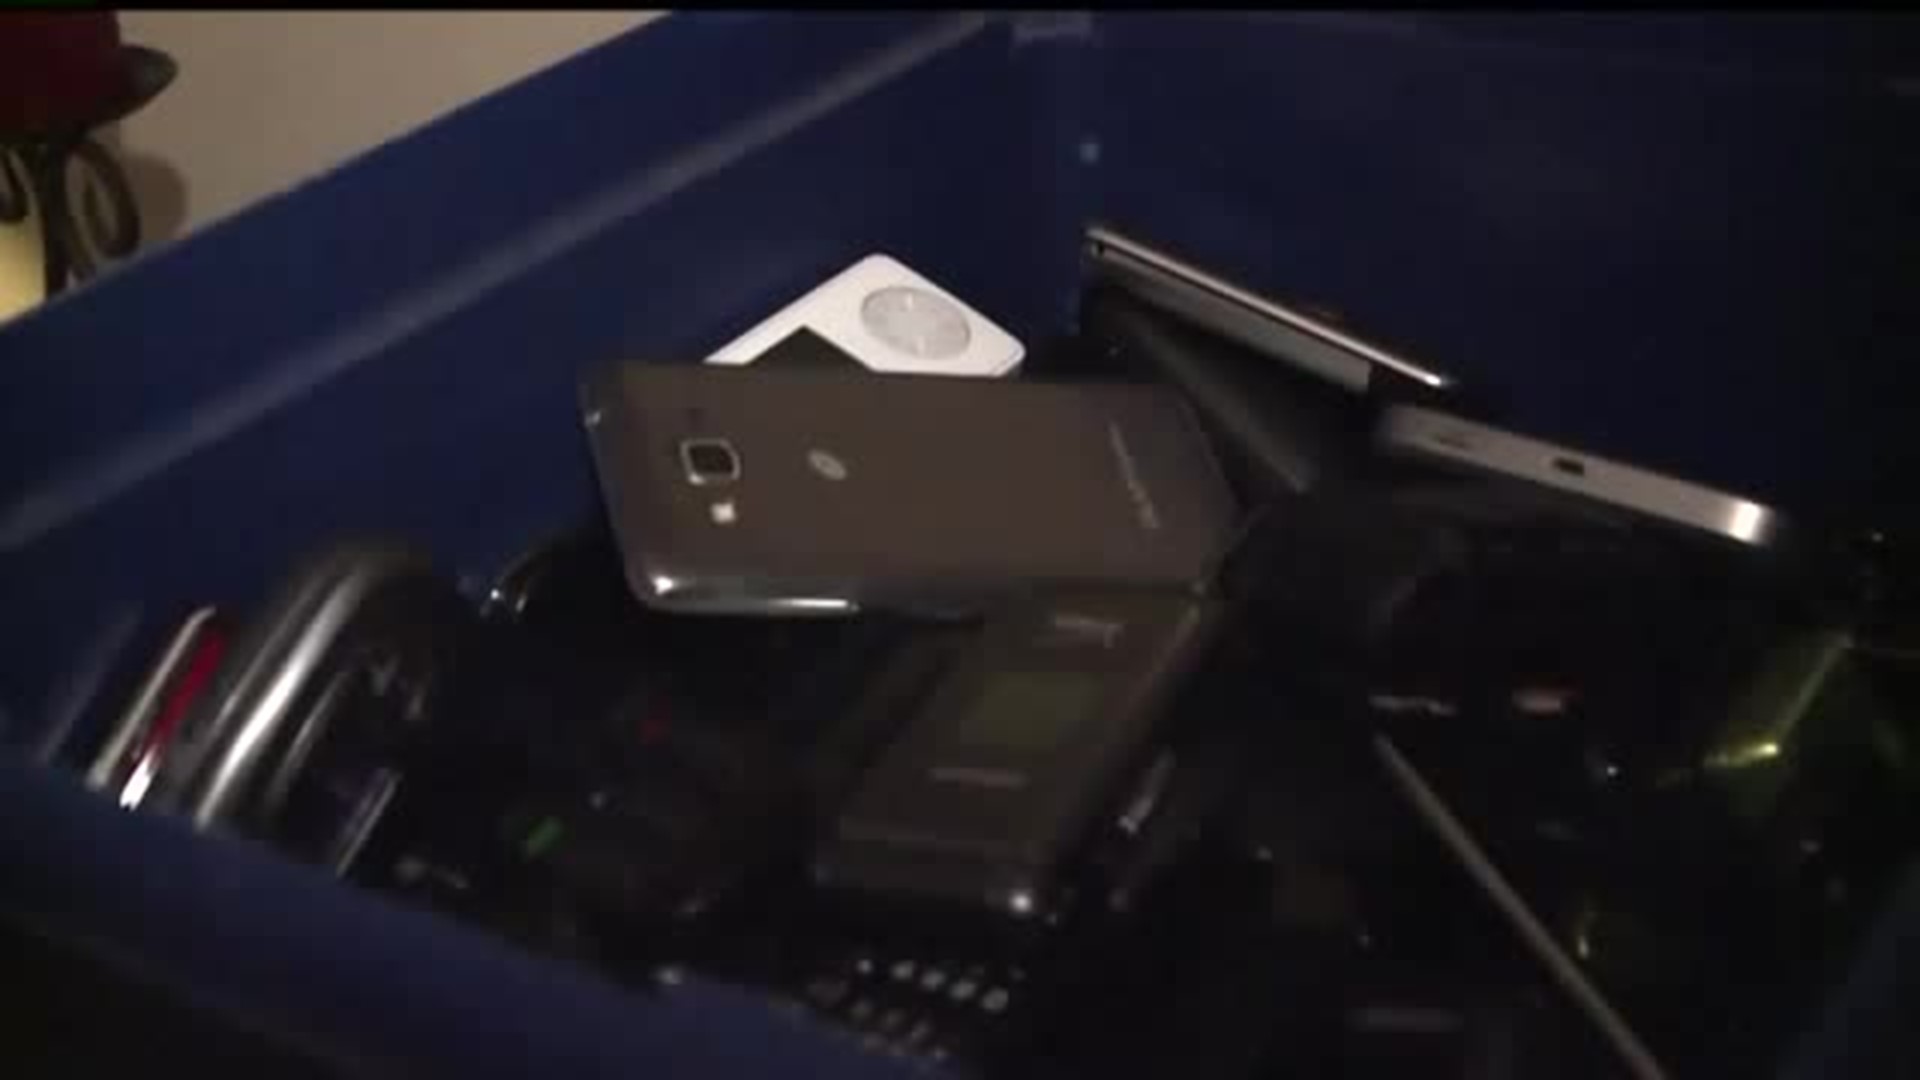 Cell phones to help domestic violence victims